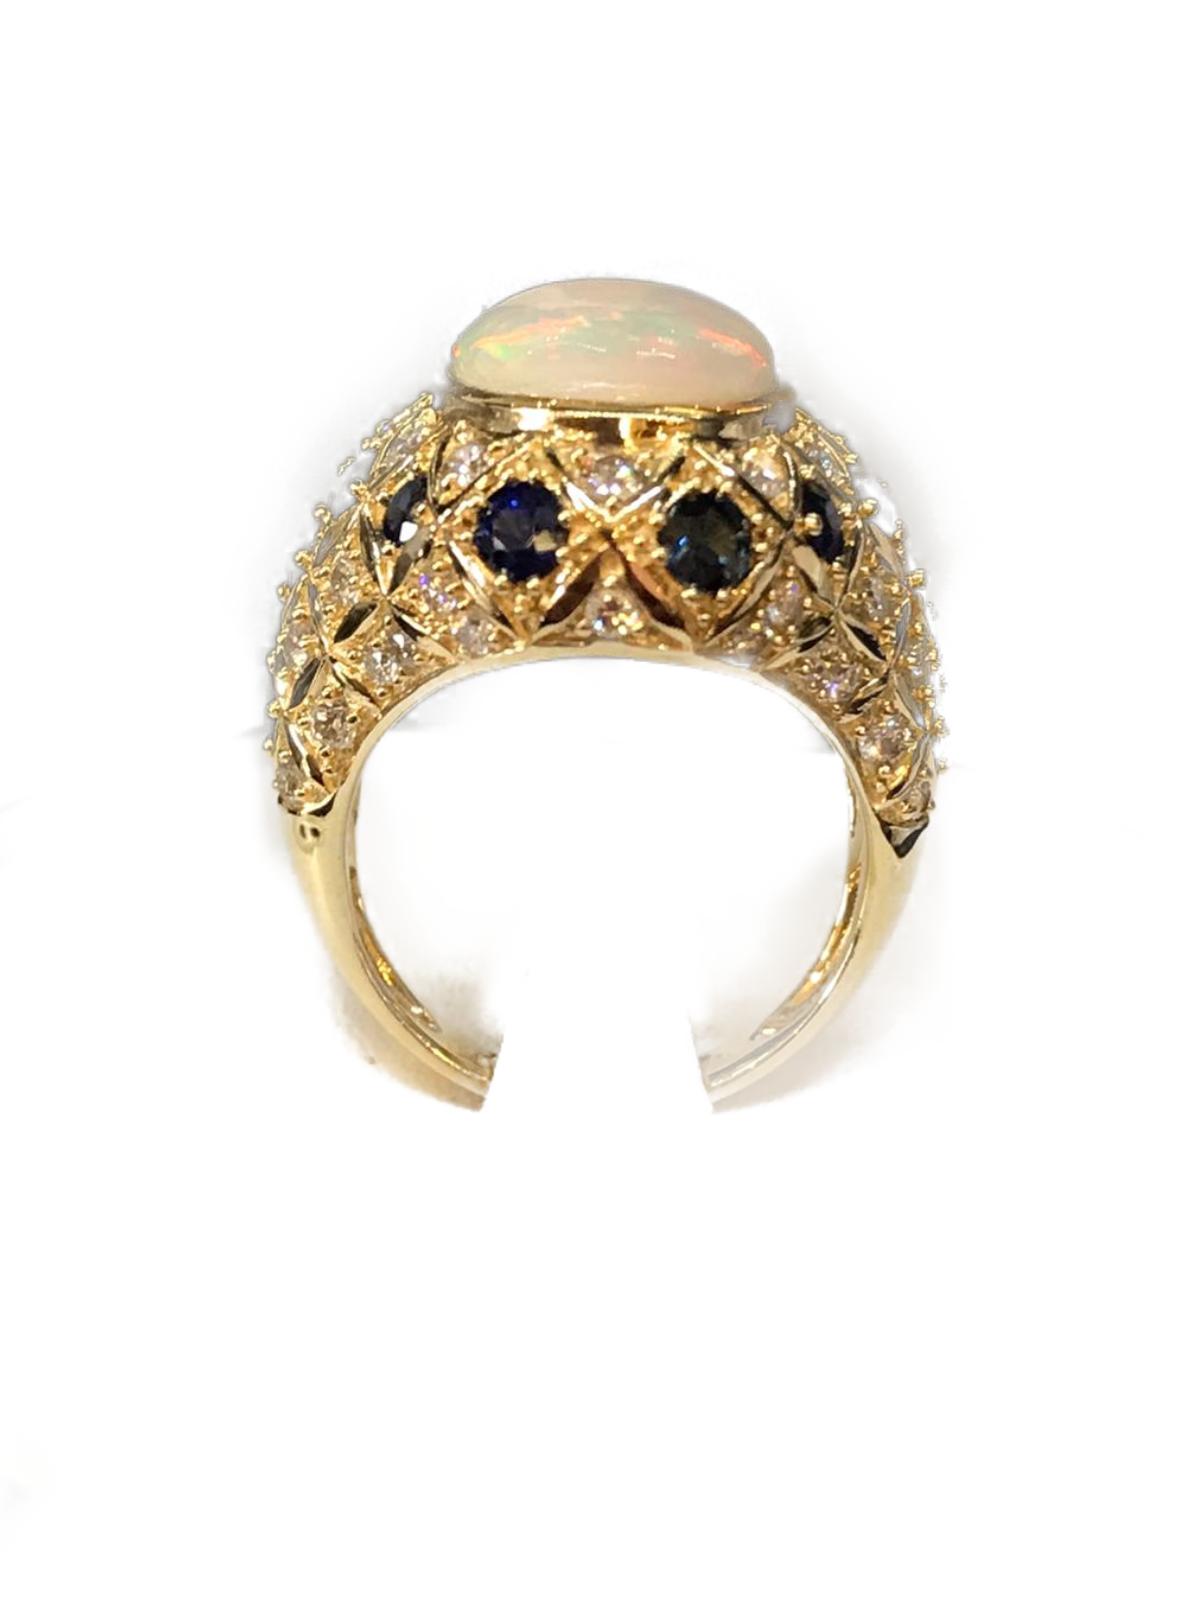 18Kt Yellow Gold and Diamond Ring - 4093